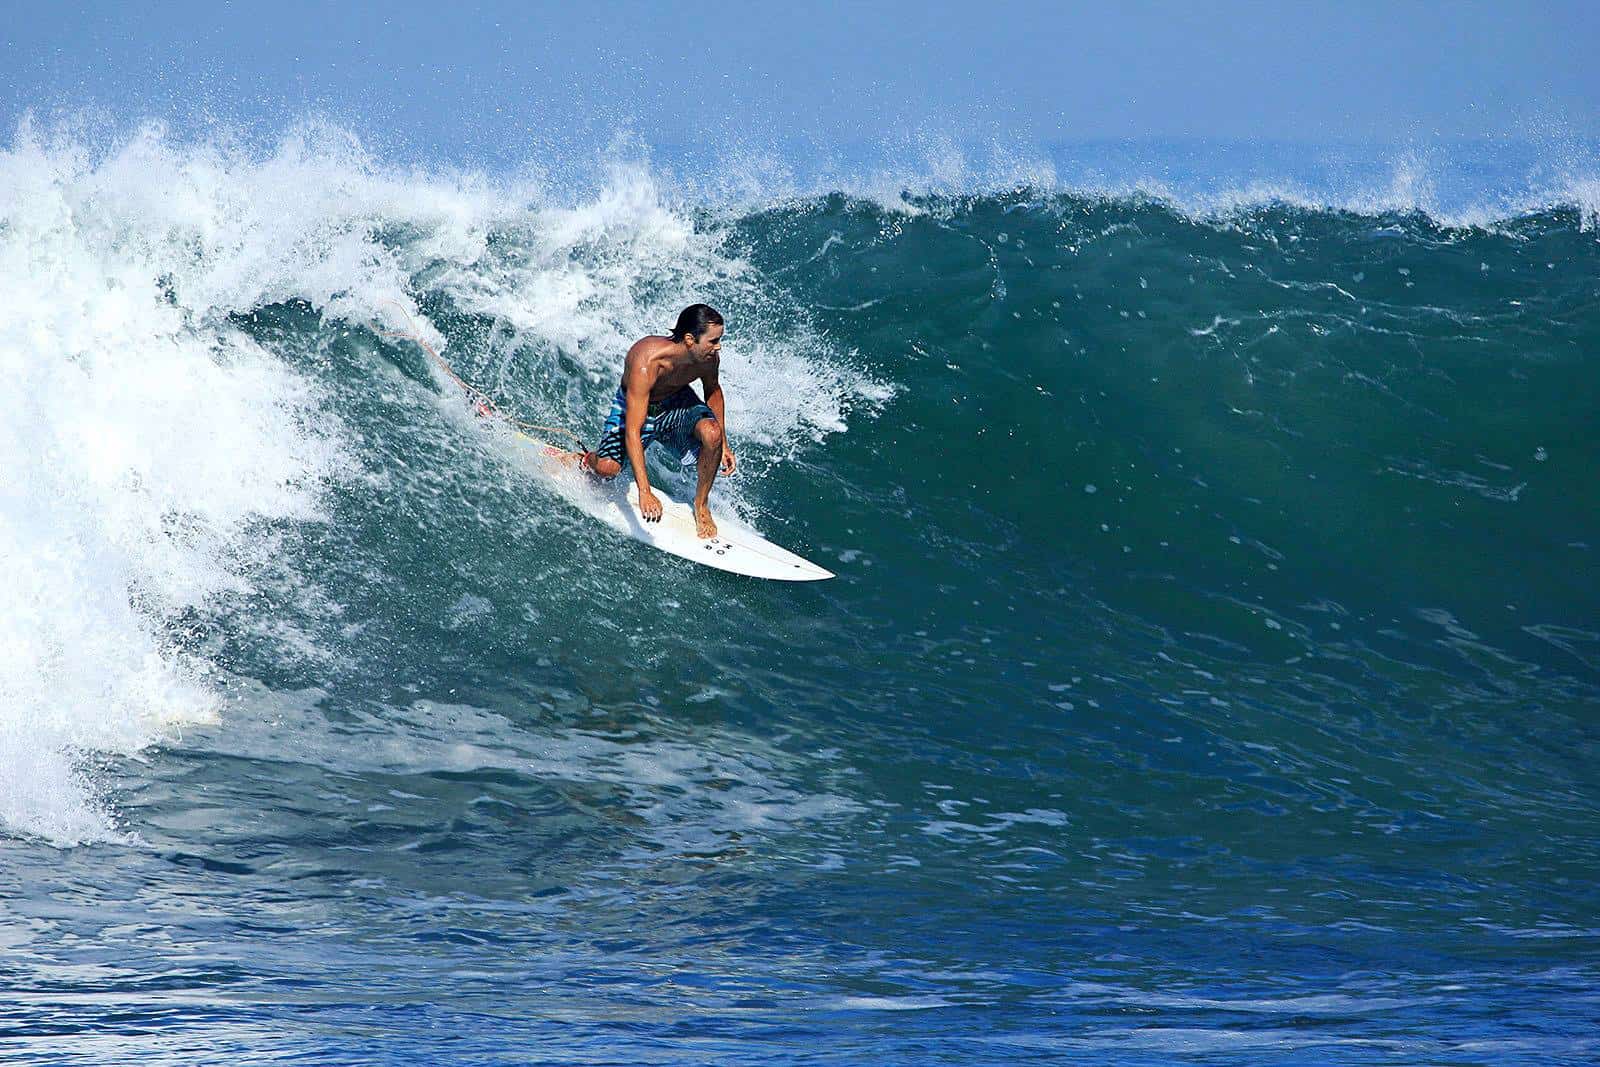 Bali Guide - What You Need To Know About Surfing And Visiting Bali